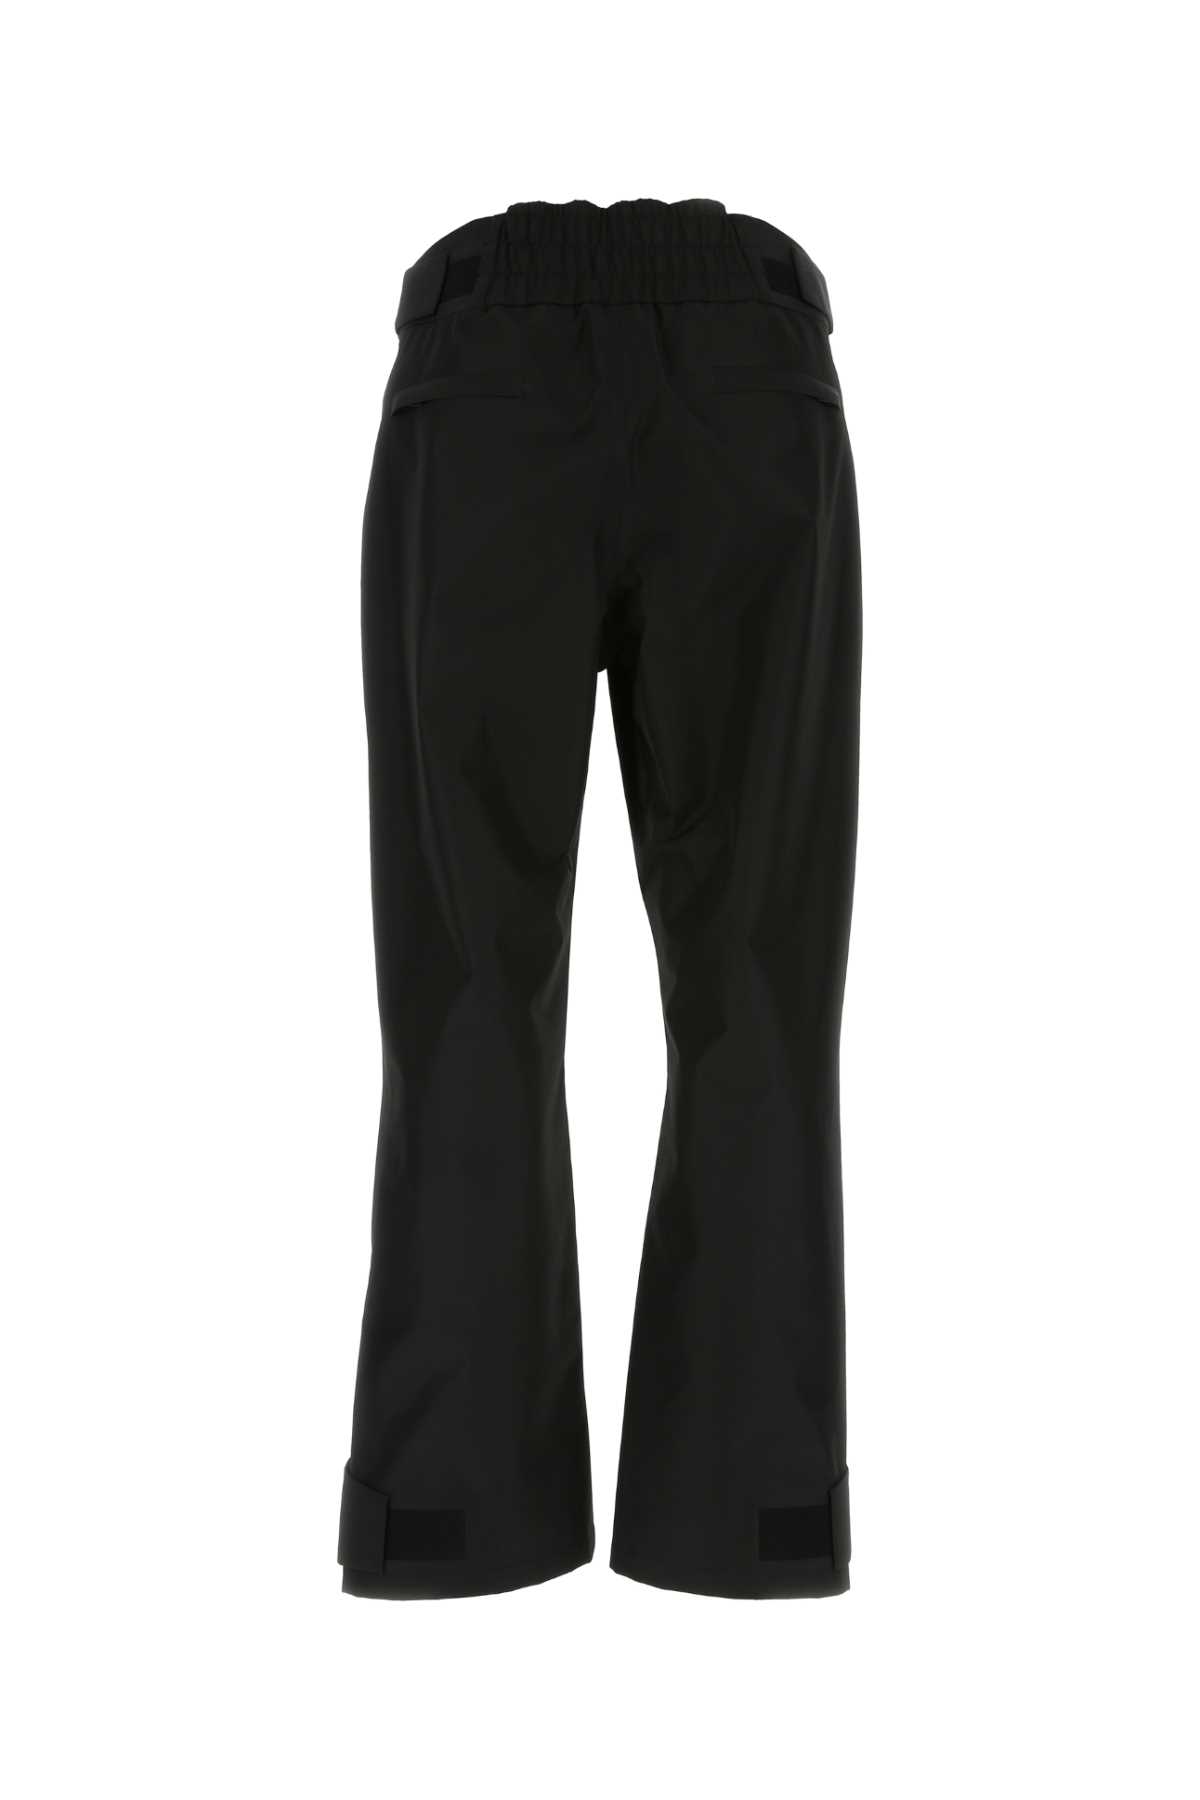 Prada Black Recycled Polyester Tech Pant In Nero